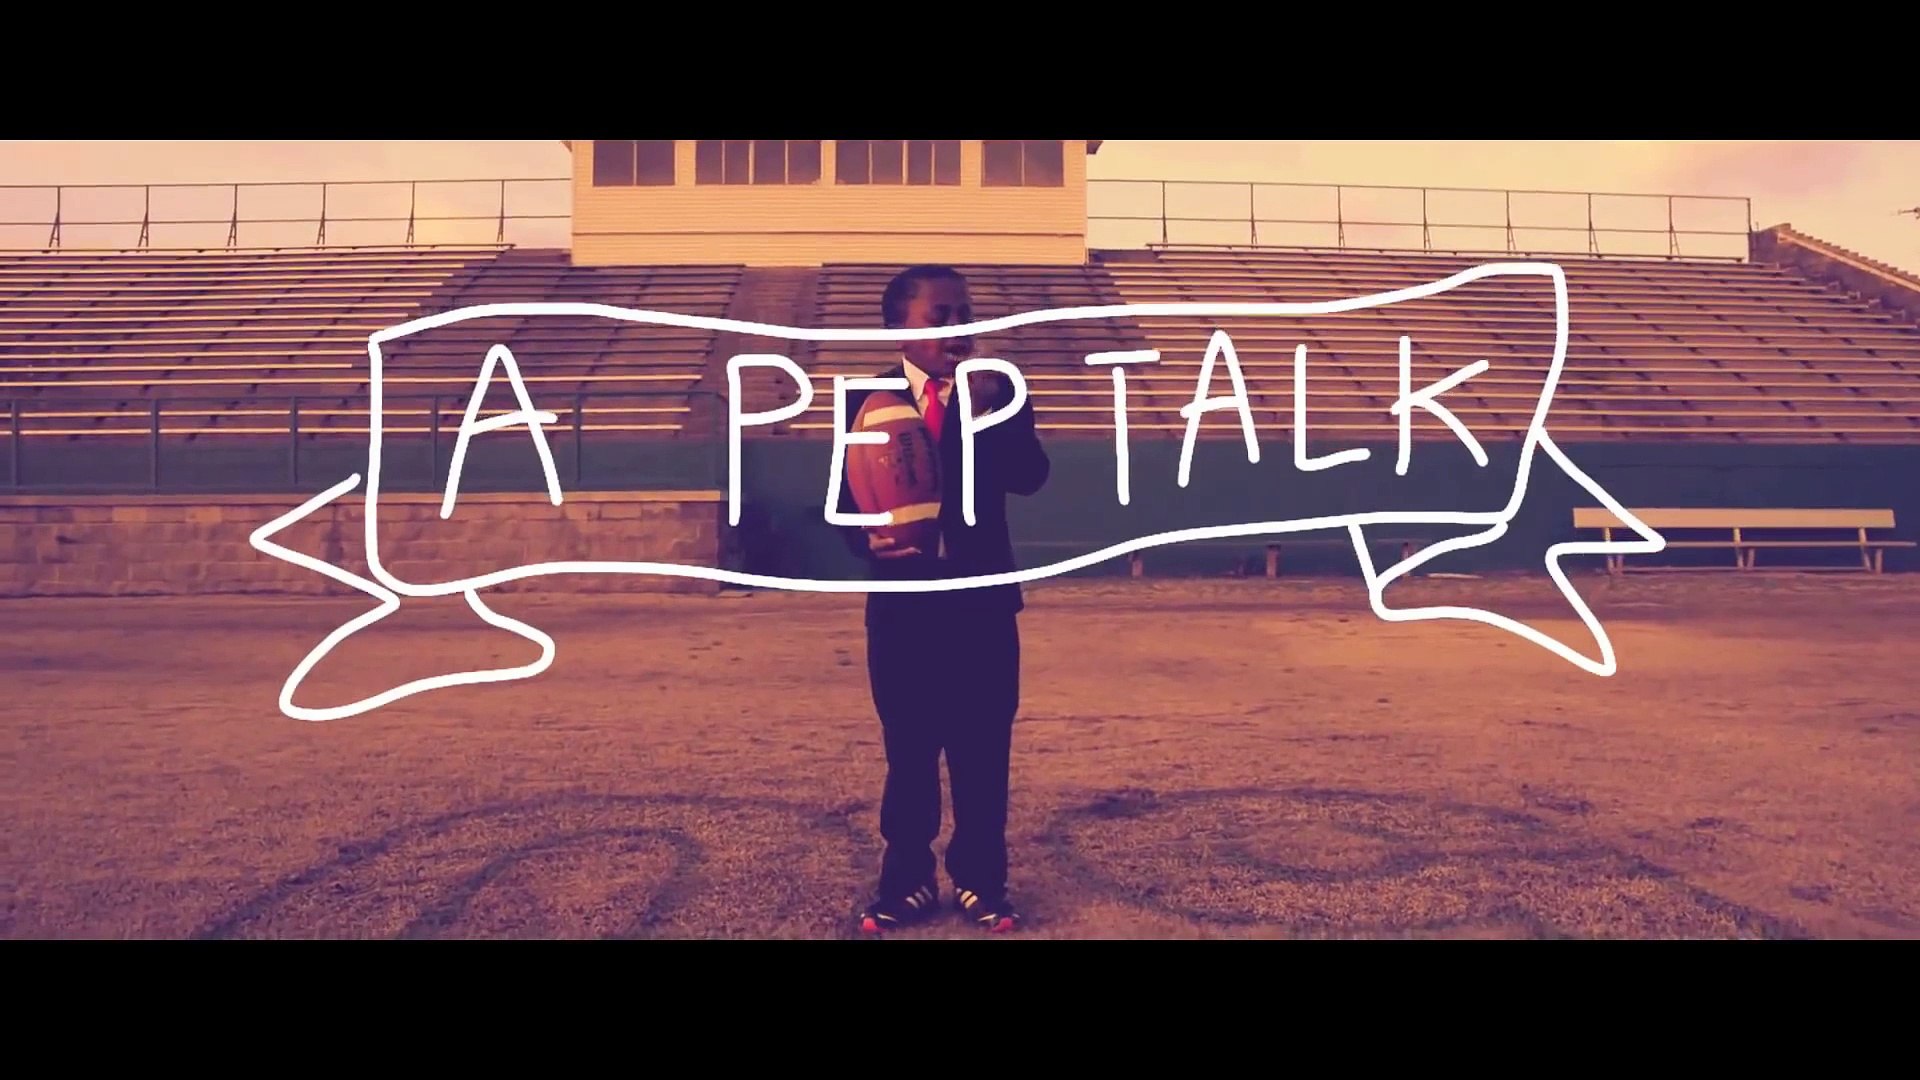 Viral Kid President Pep Talk Imagine if every school played this before class!